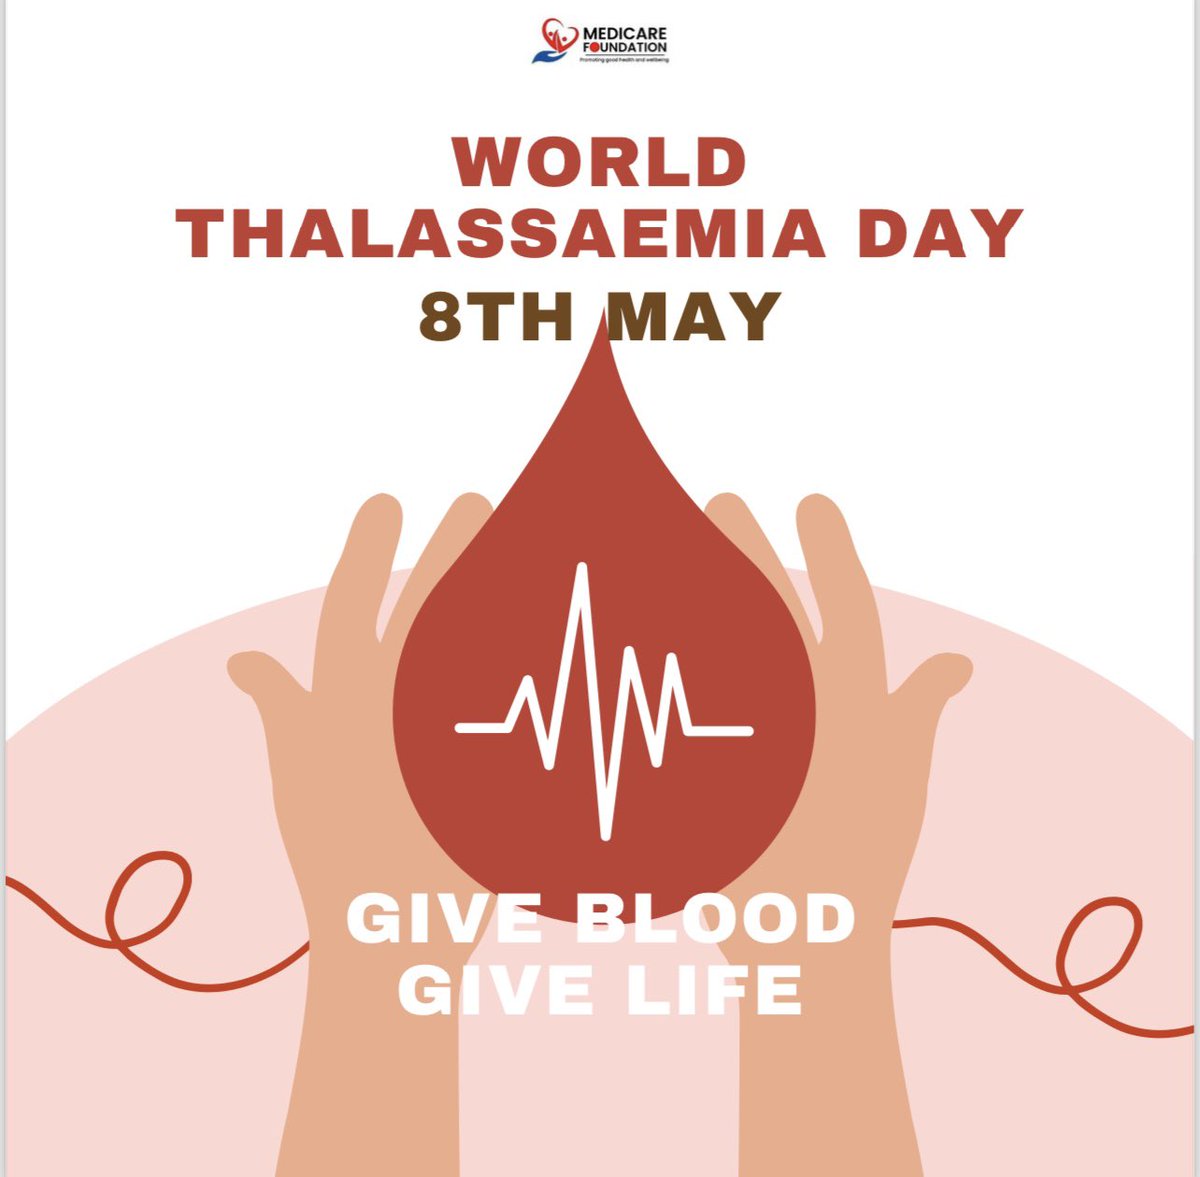 Happy World Thalassaemia Day. Did you know Thalassaemia is also a genetic 🧬 condition just like #sicklecell . It affects haemoglobin levels causing severe anaemia in the patients. Most #Thalassaemia patients require regular blood transfusions. #givebloodsavelives @GiveBloodNHS